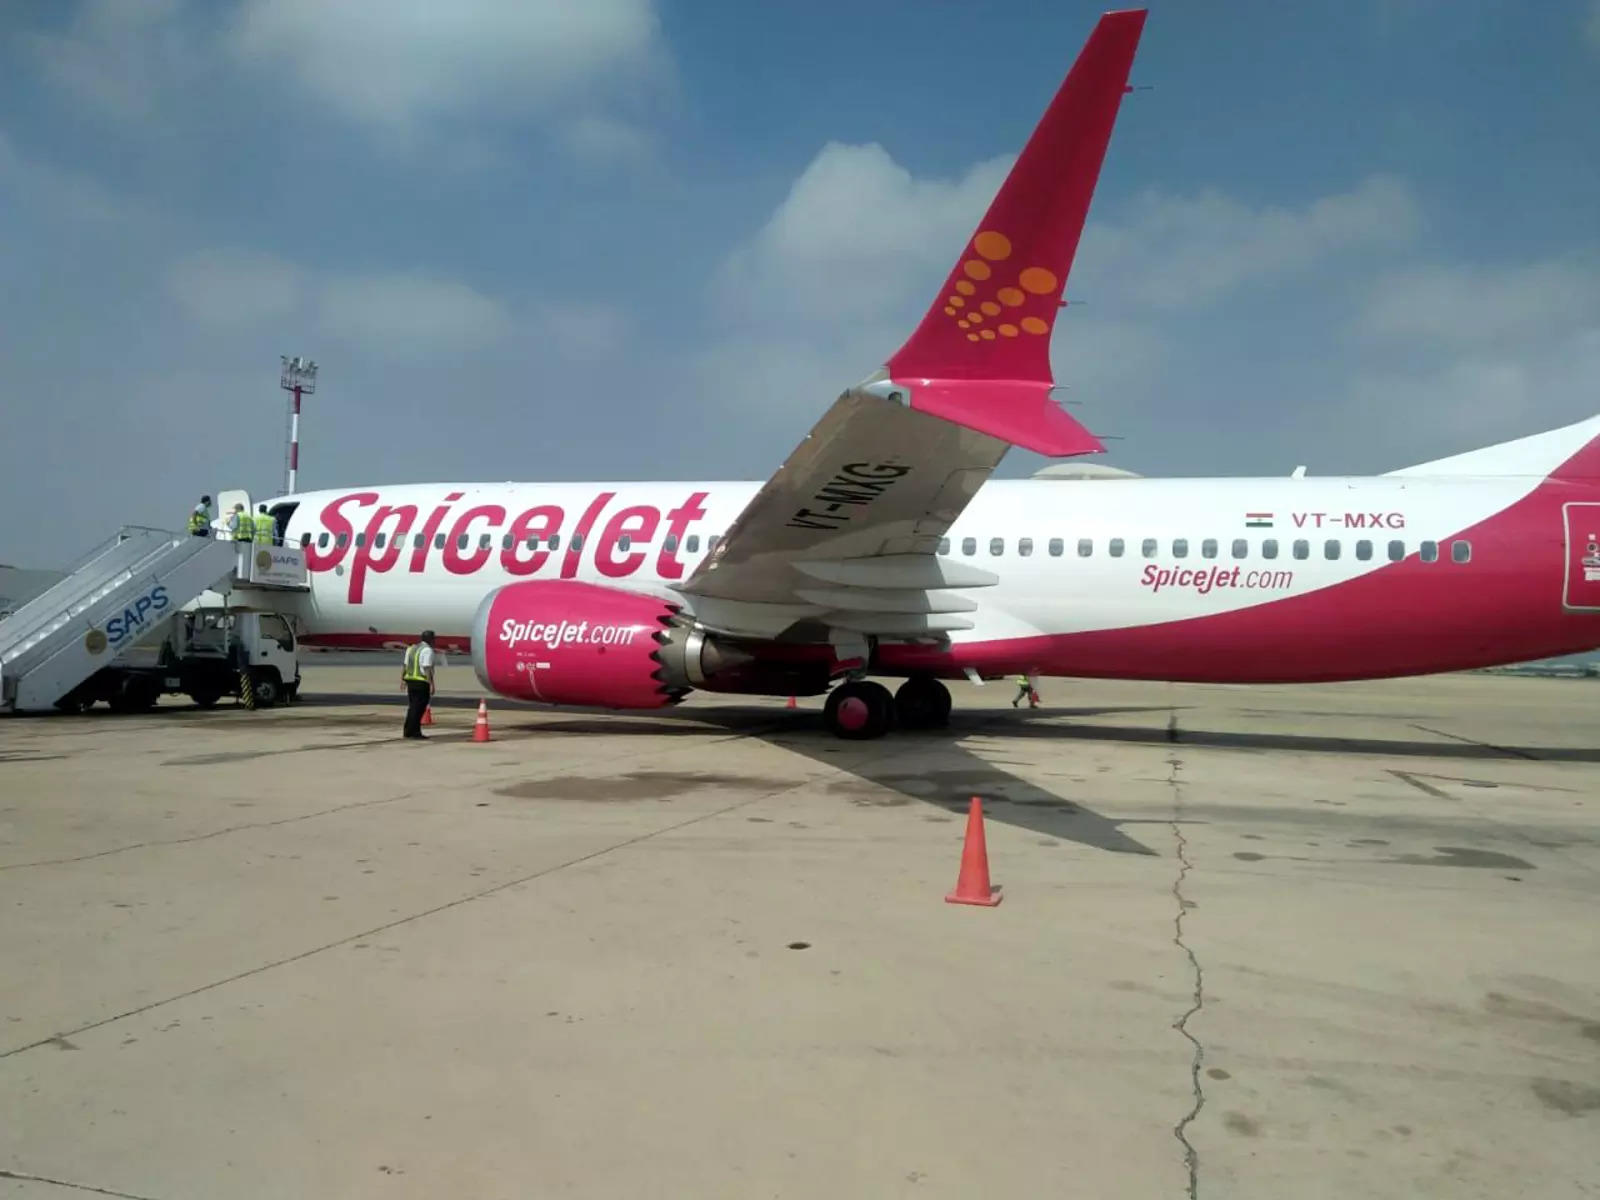 DGCA issues show-cause notice to SpiceJet in connection with degradation of safety margins